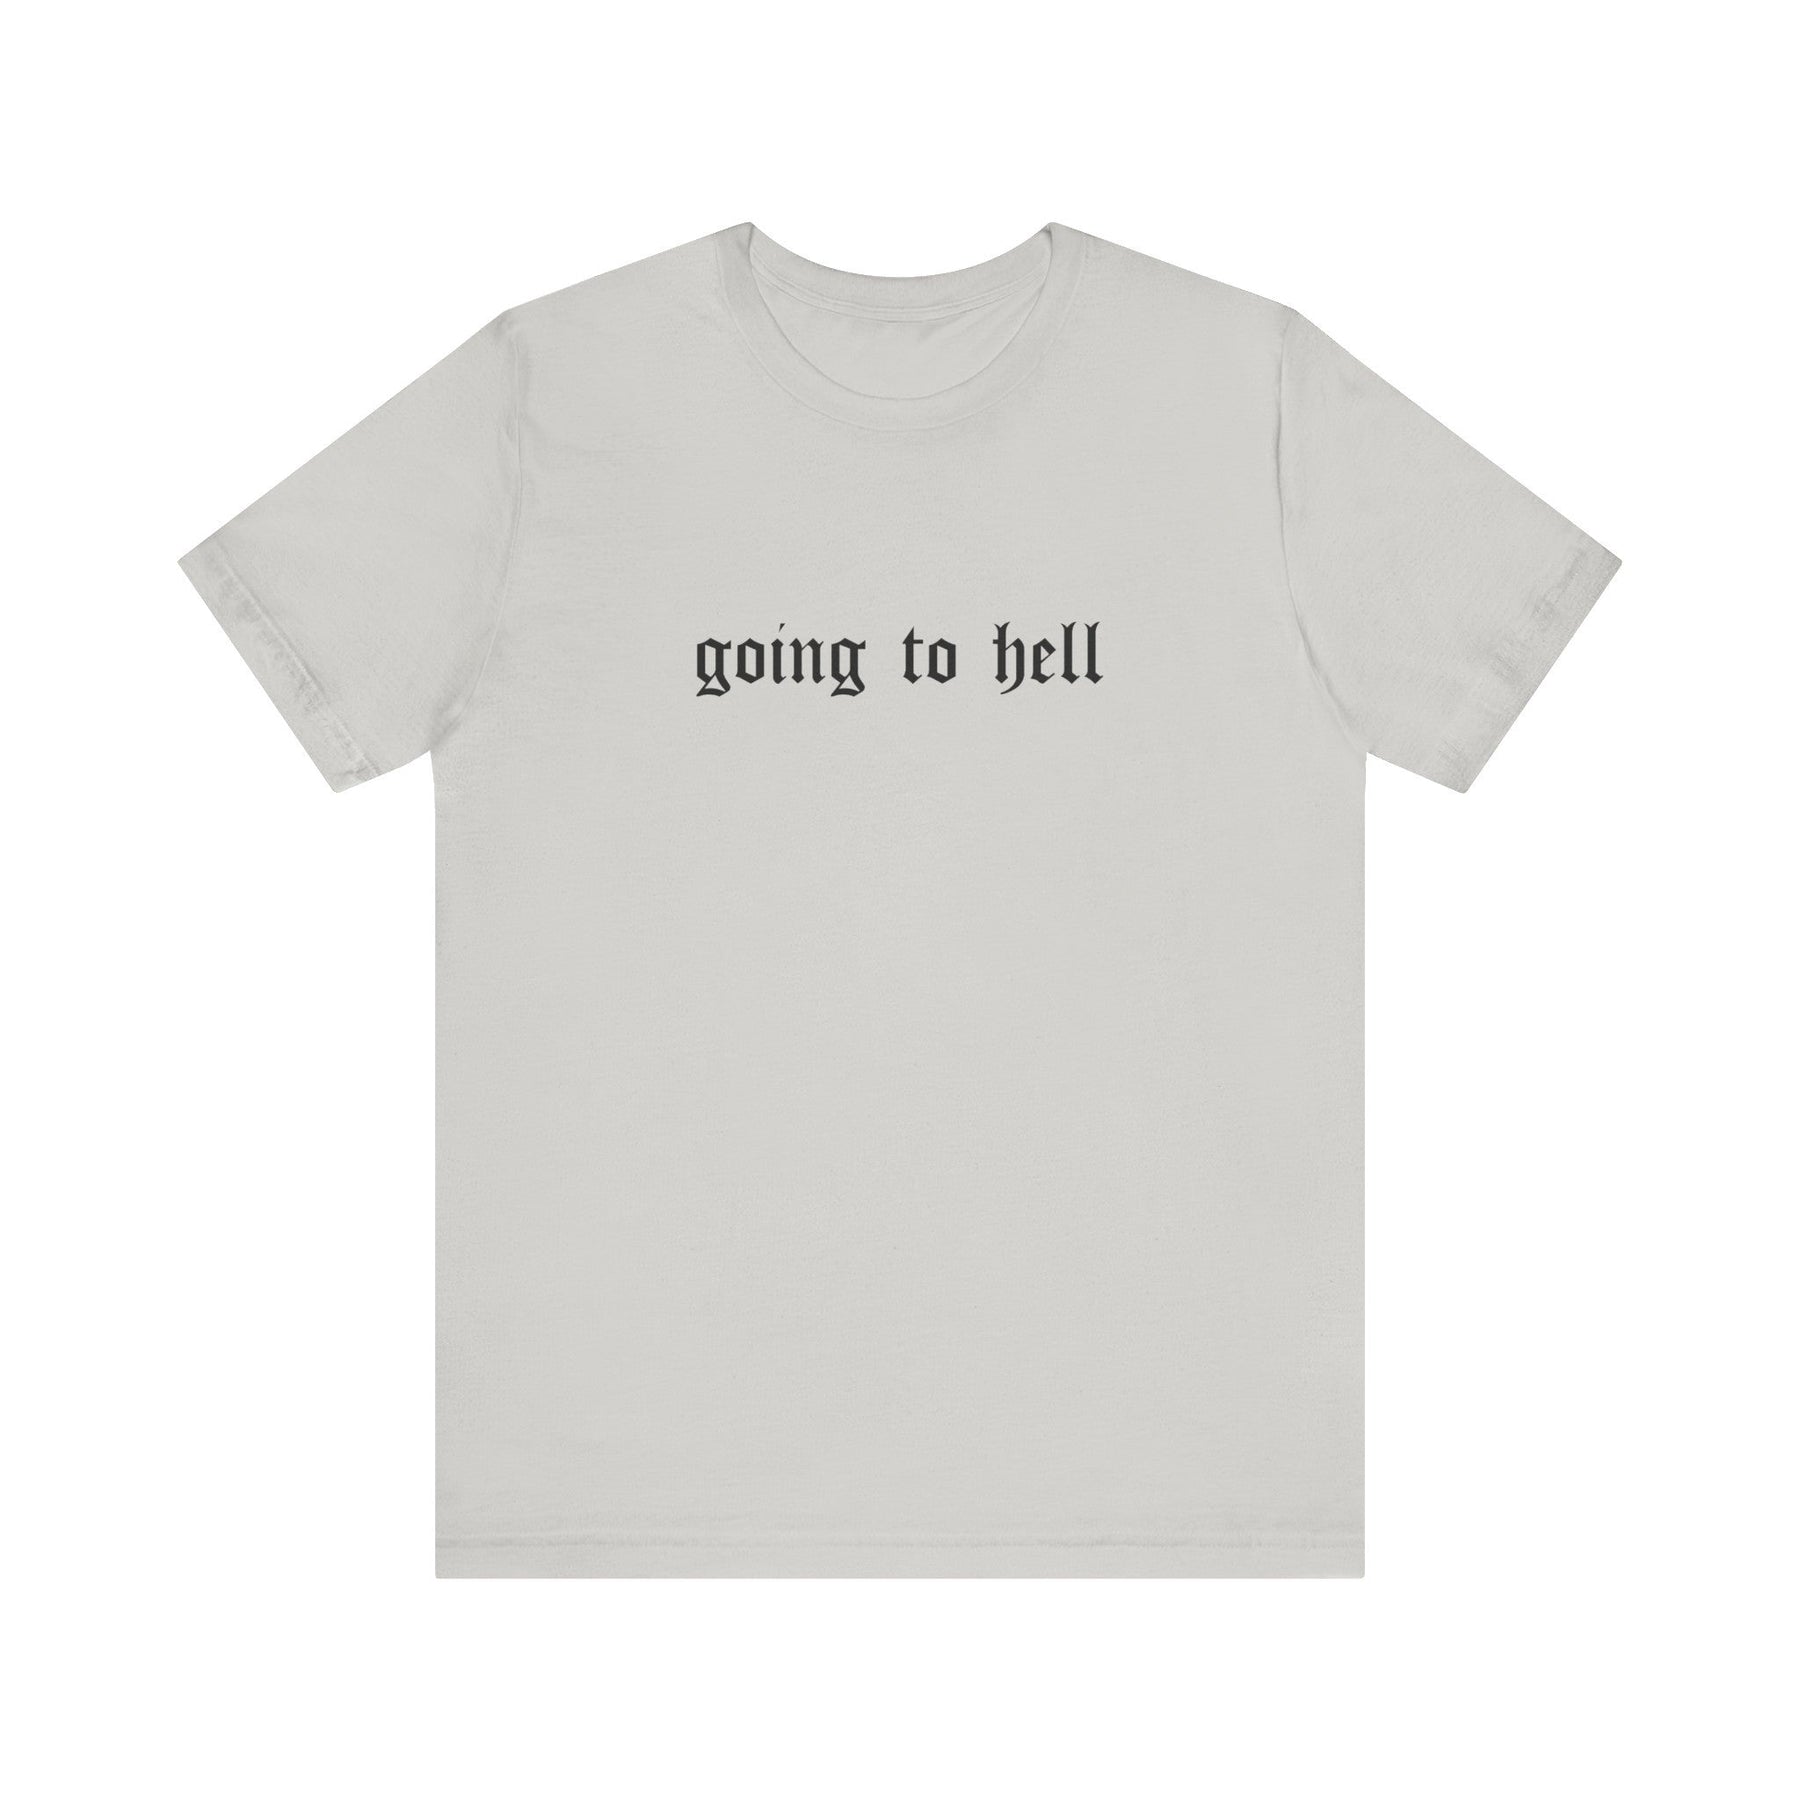 Going to Hell Gothic T - Shirt - Goth Cloth Co.T - Shirt30053052517287554300